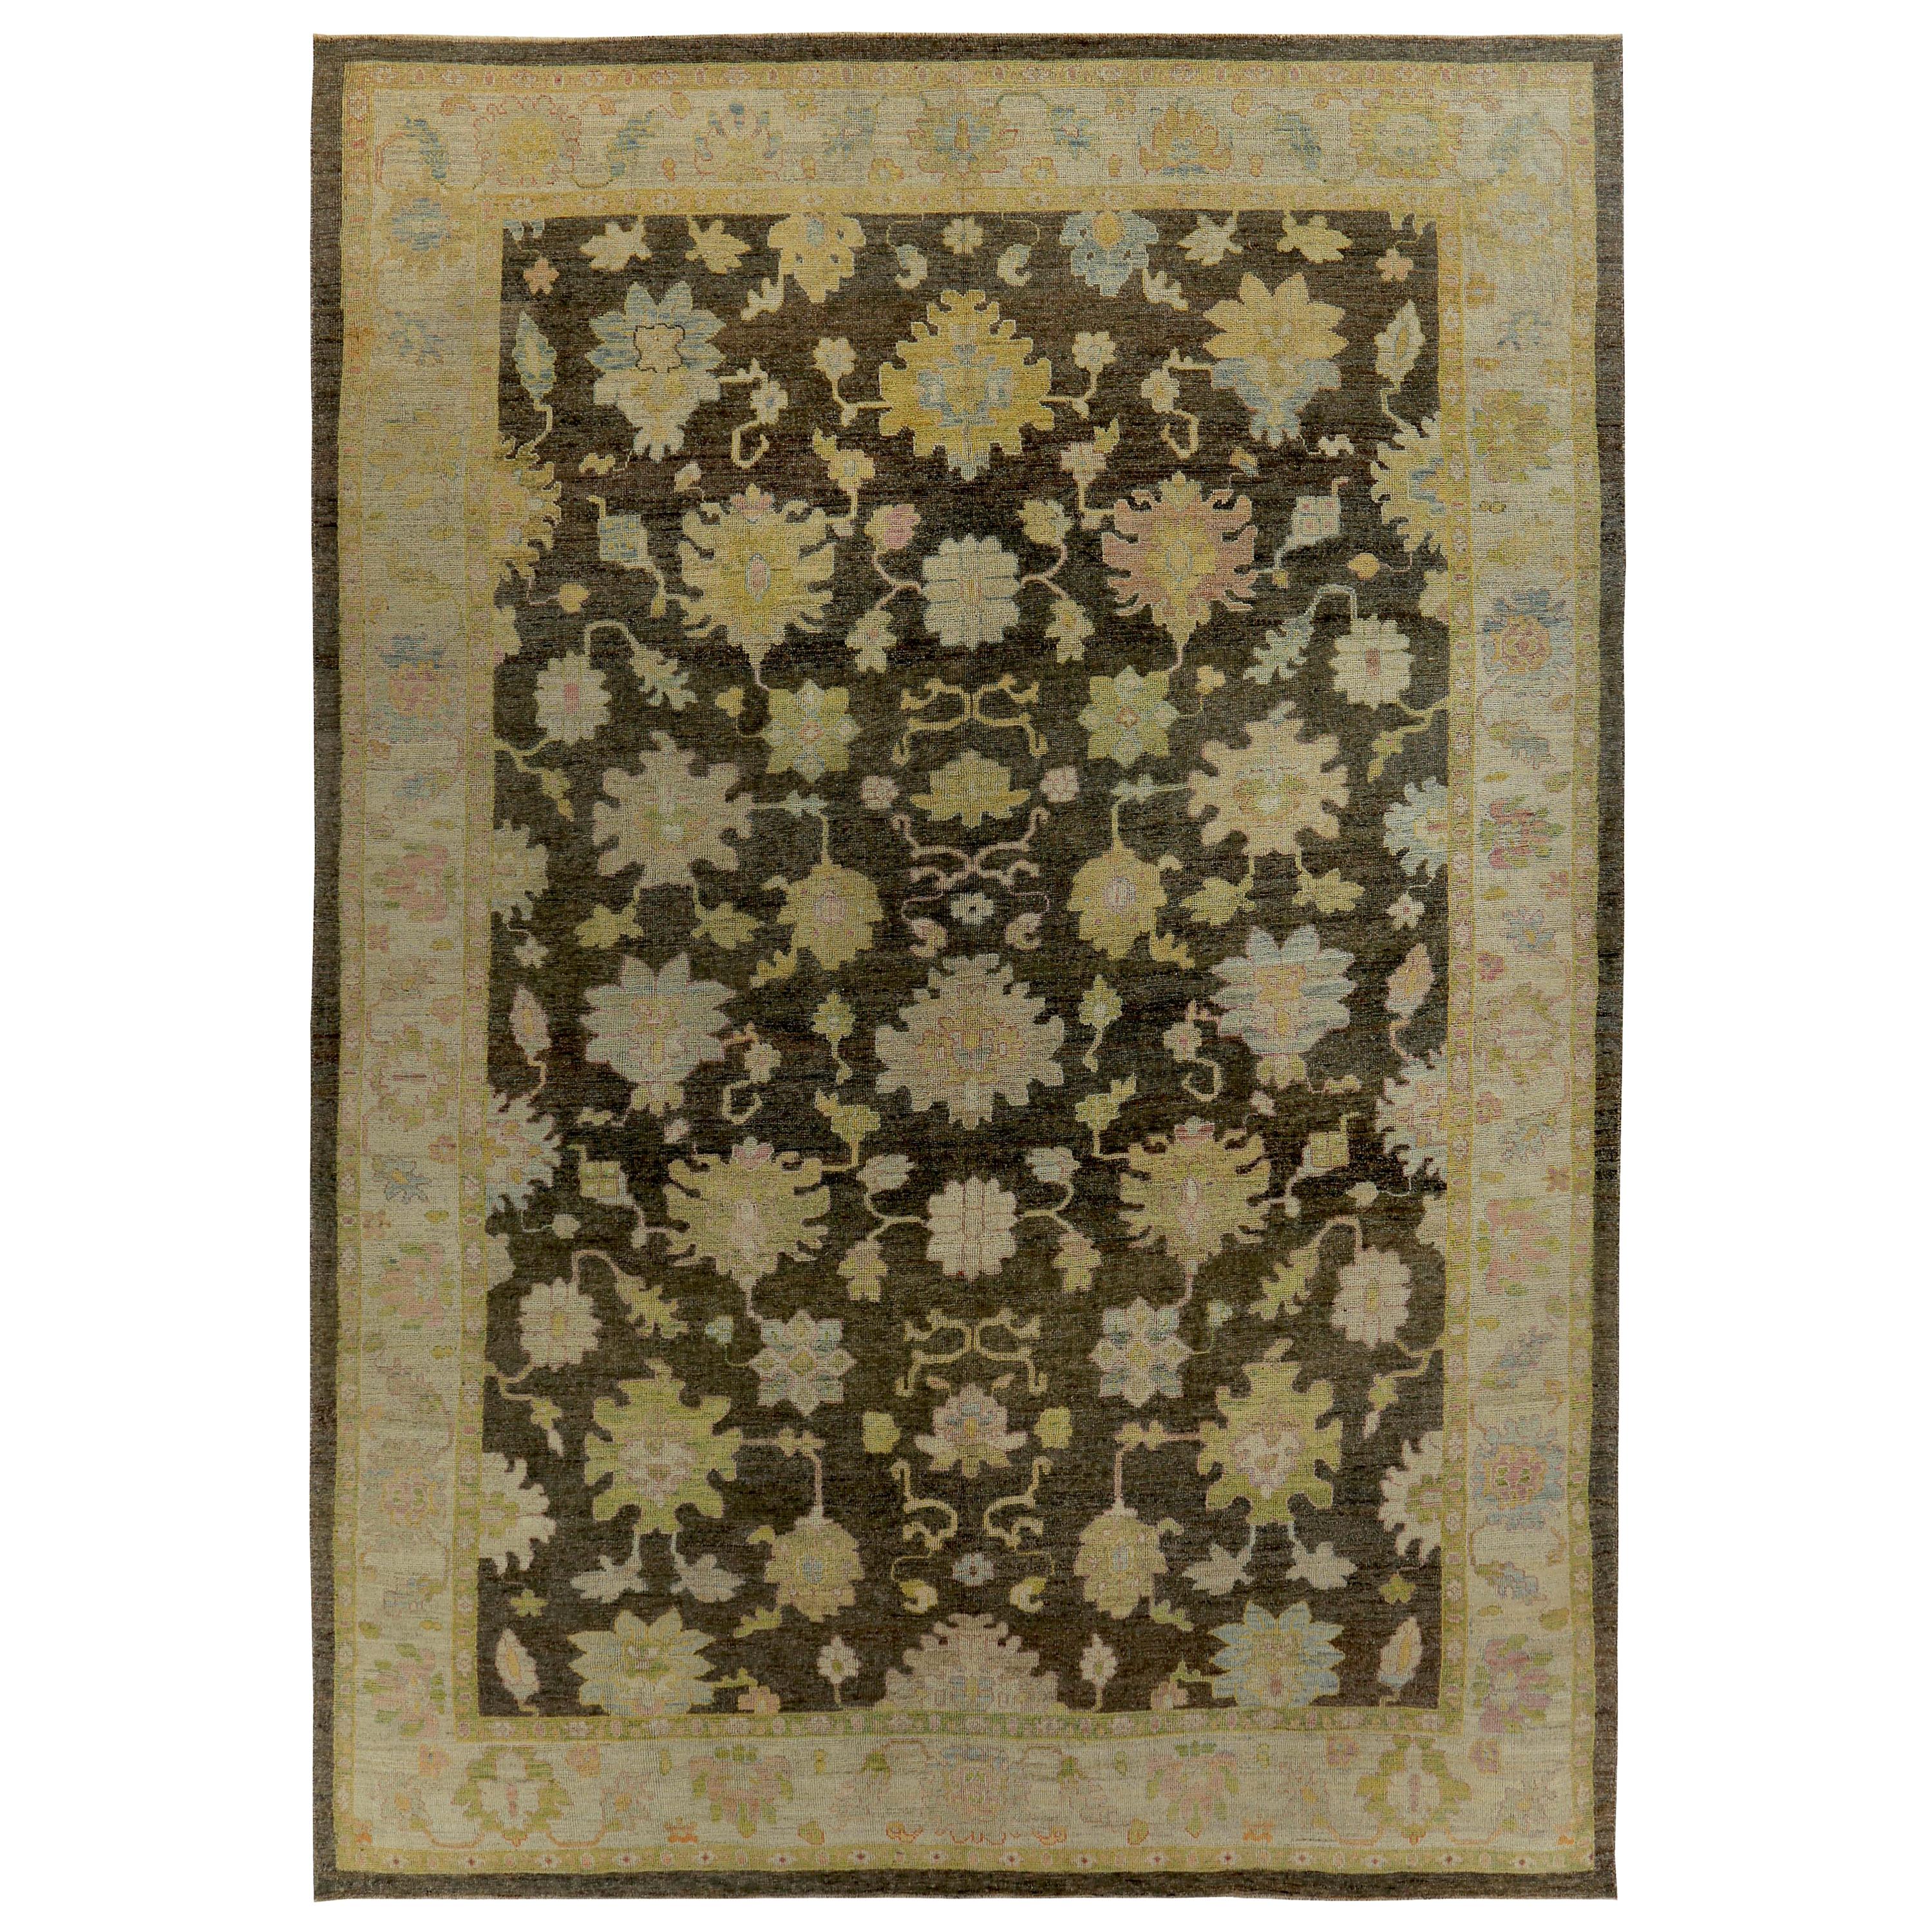 Turkish Oushak Rug with Green and Blue Floral Details on Ivory and Brown Field